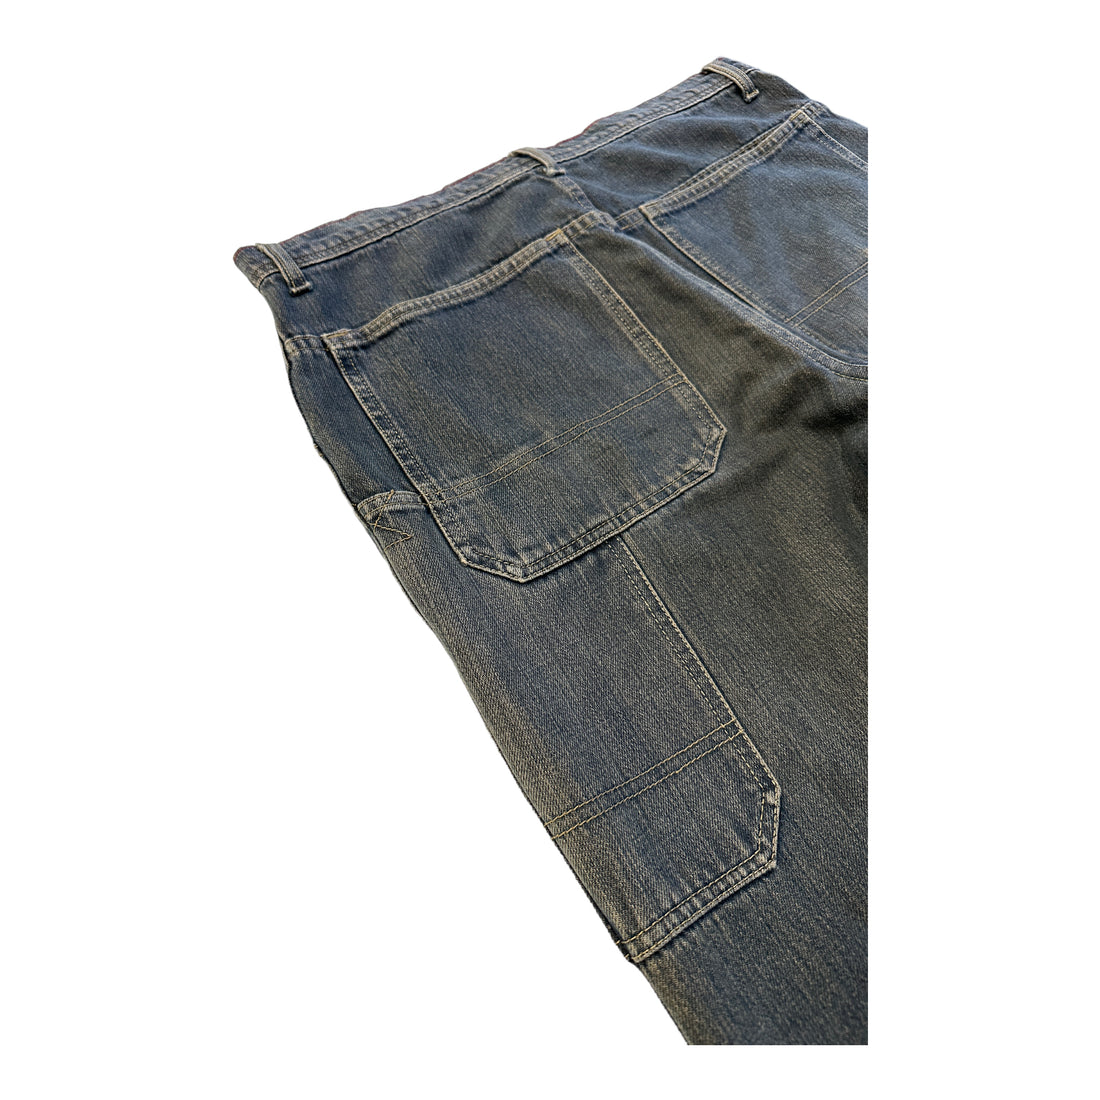 JNCO FADED BAGGY JEANS BLUE 36x30 - 2000s